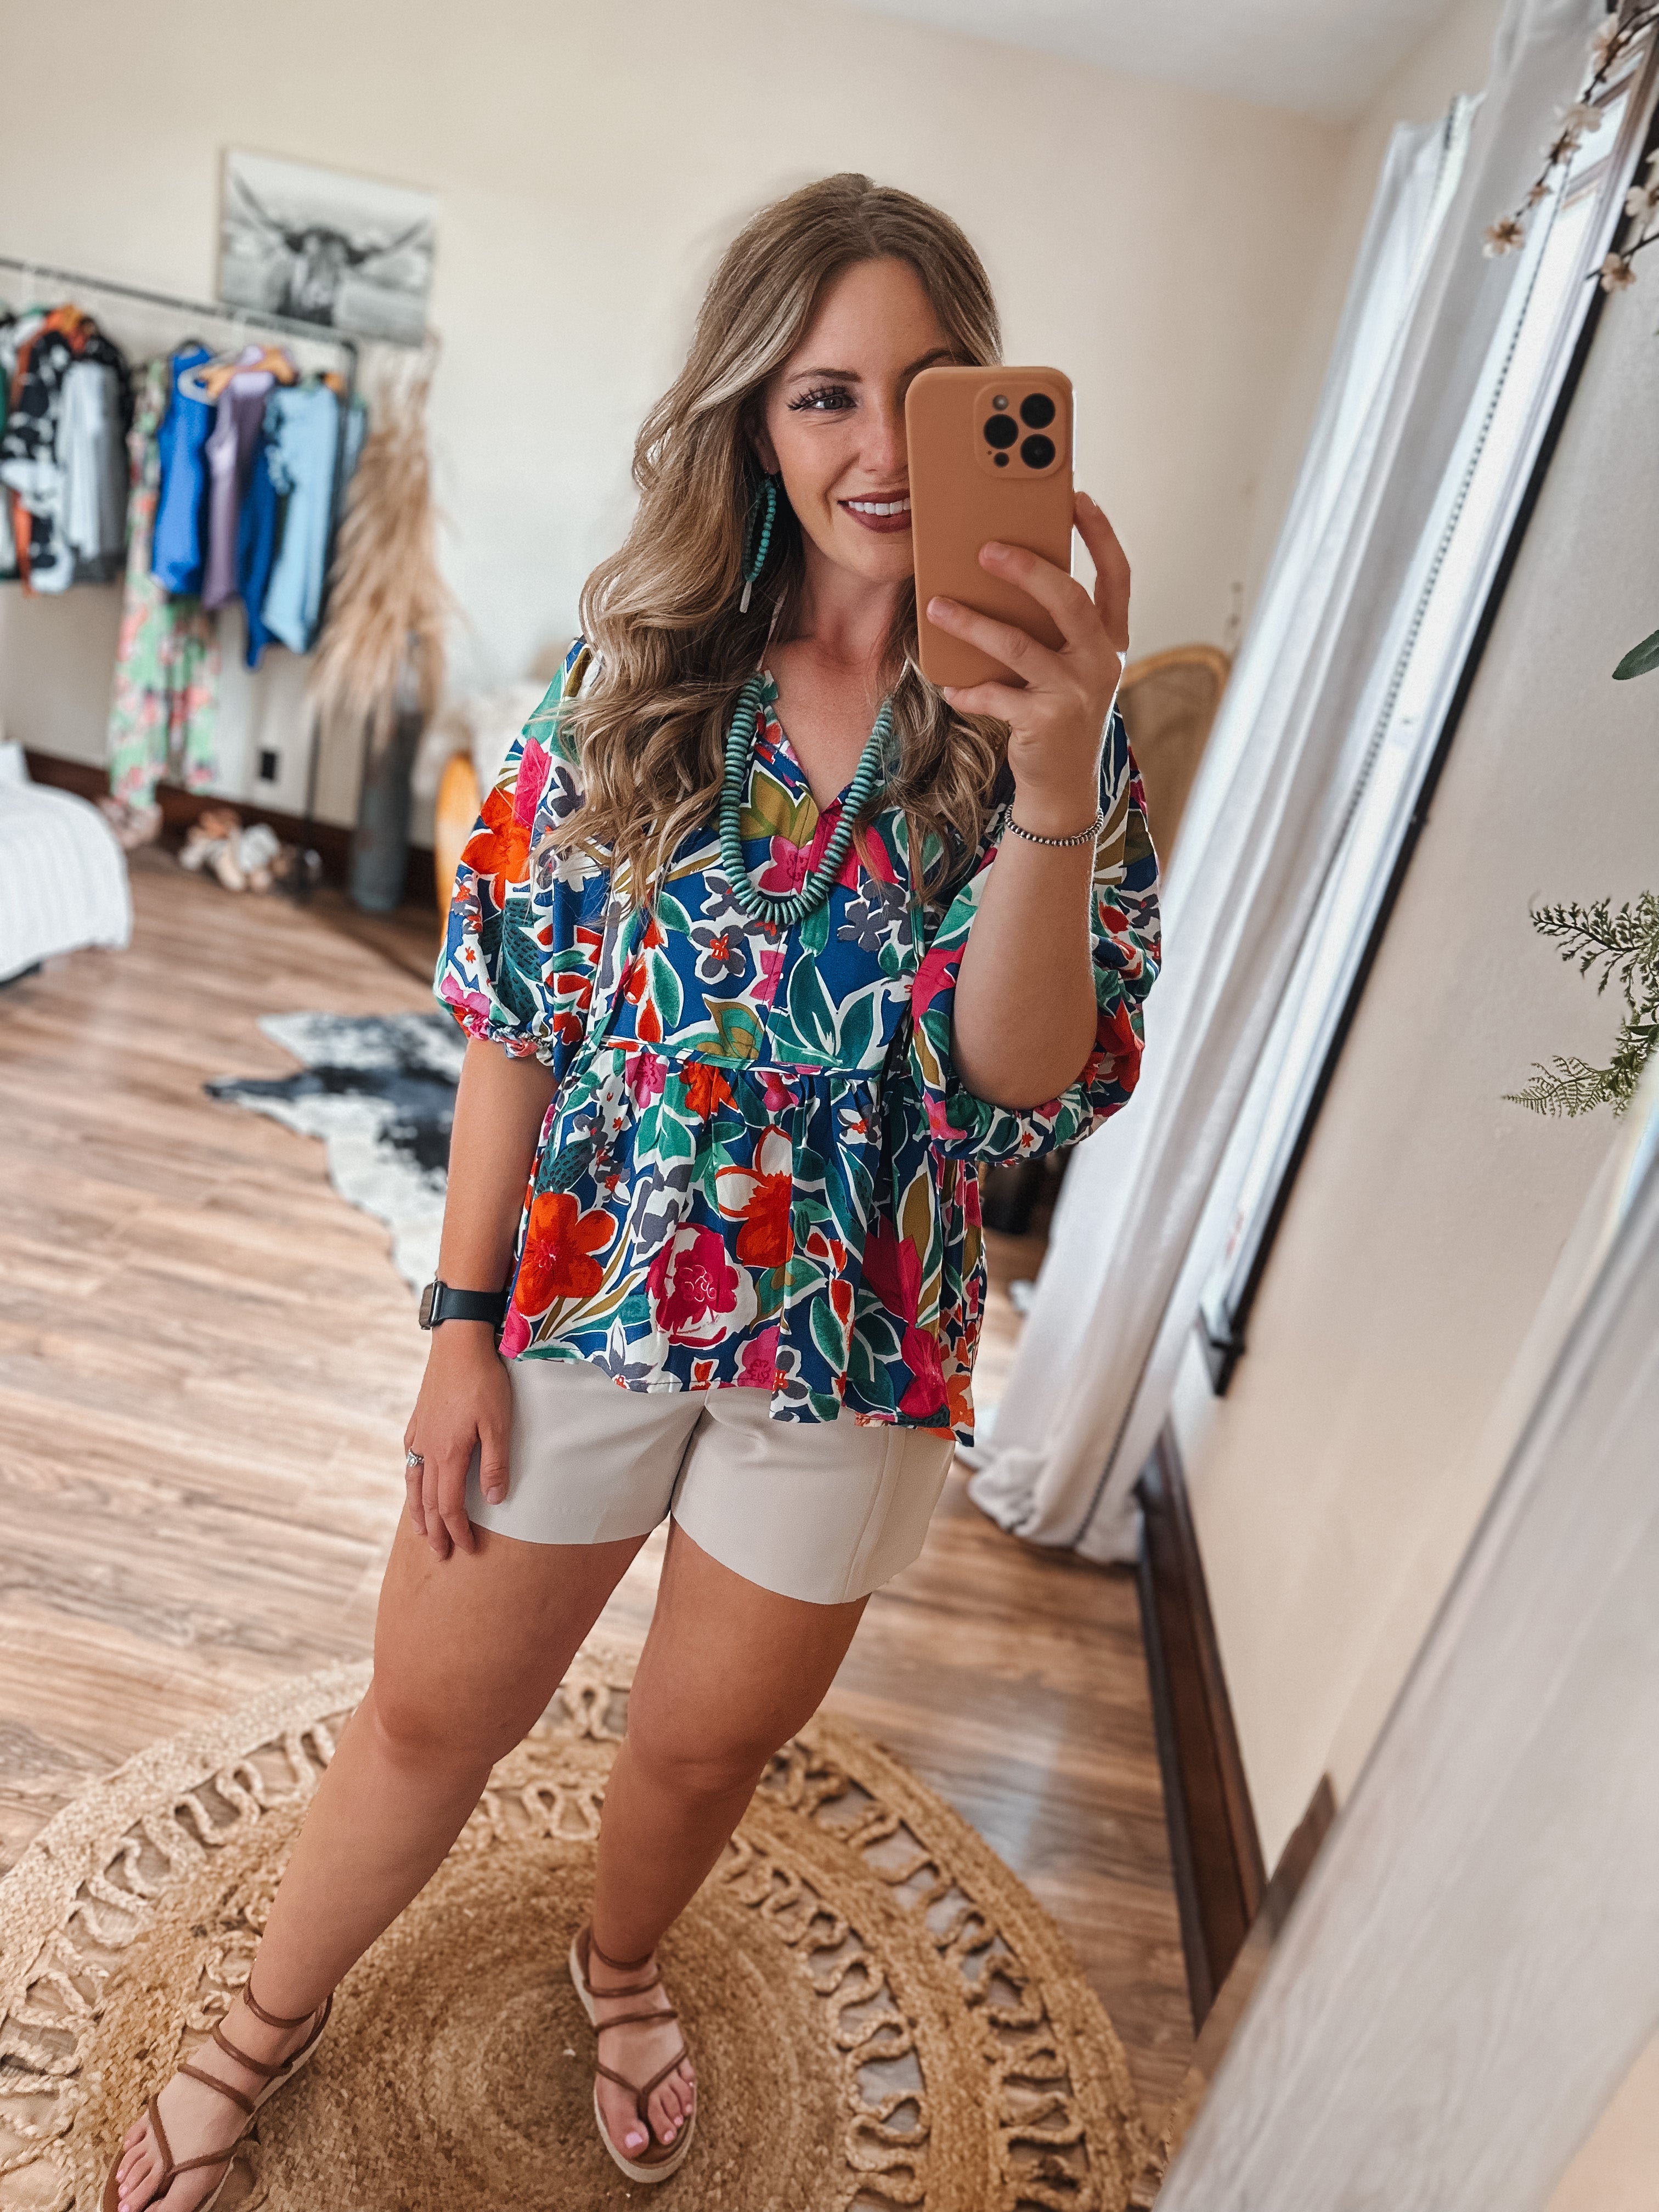 Navy Floral Blouse